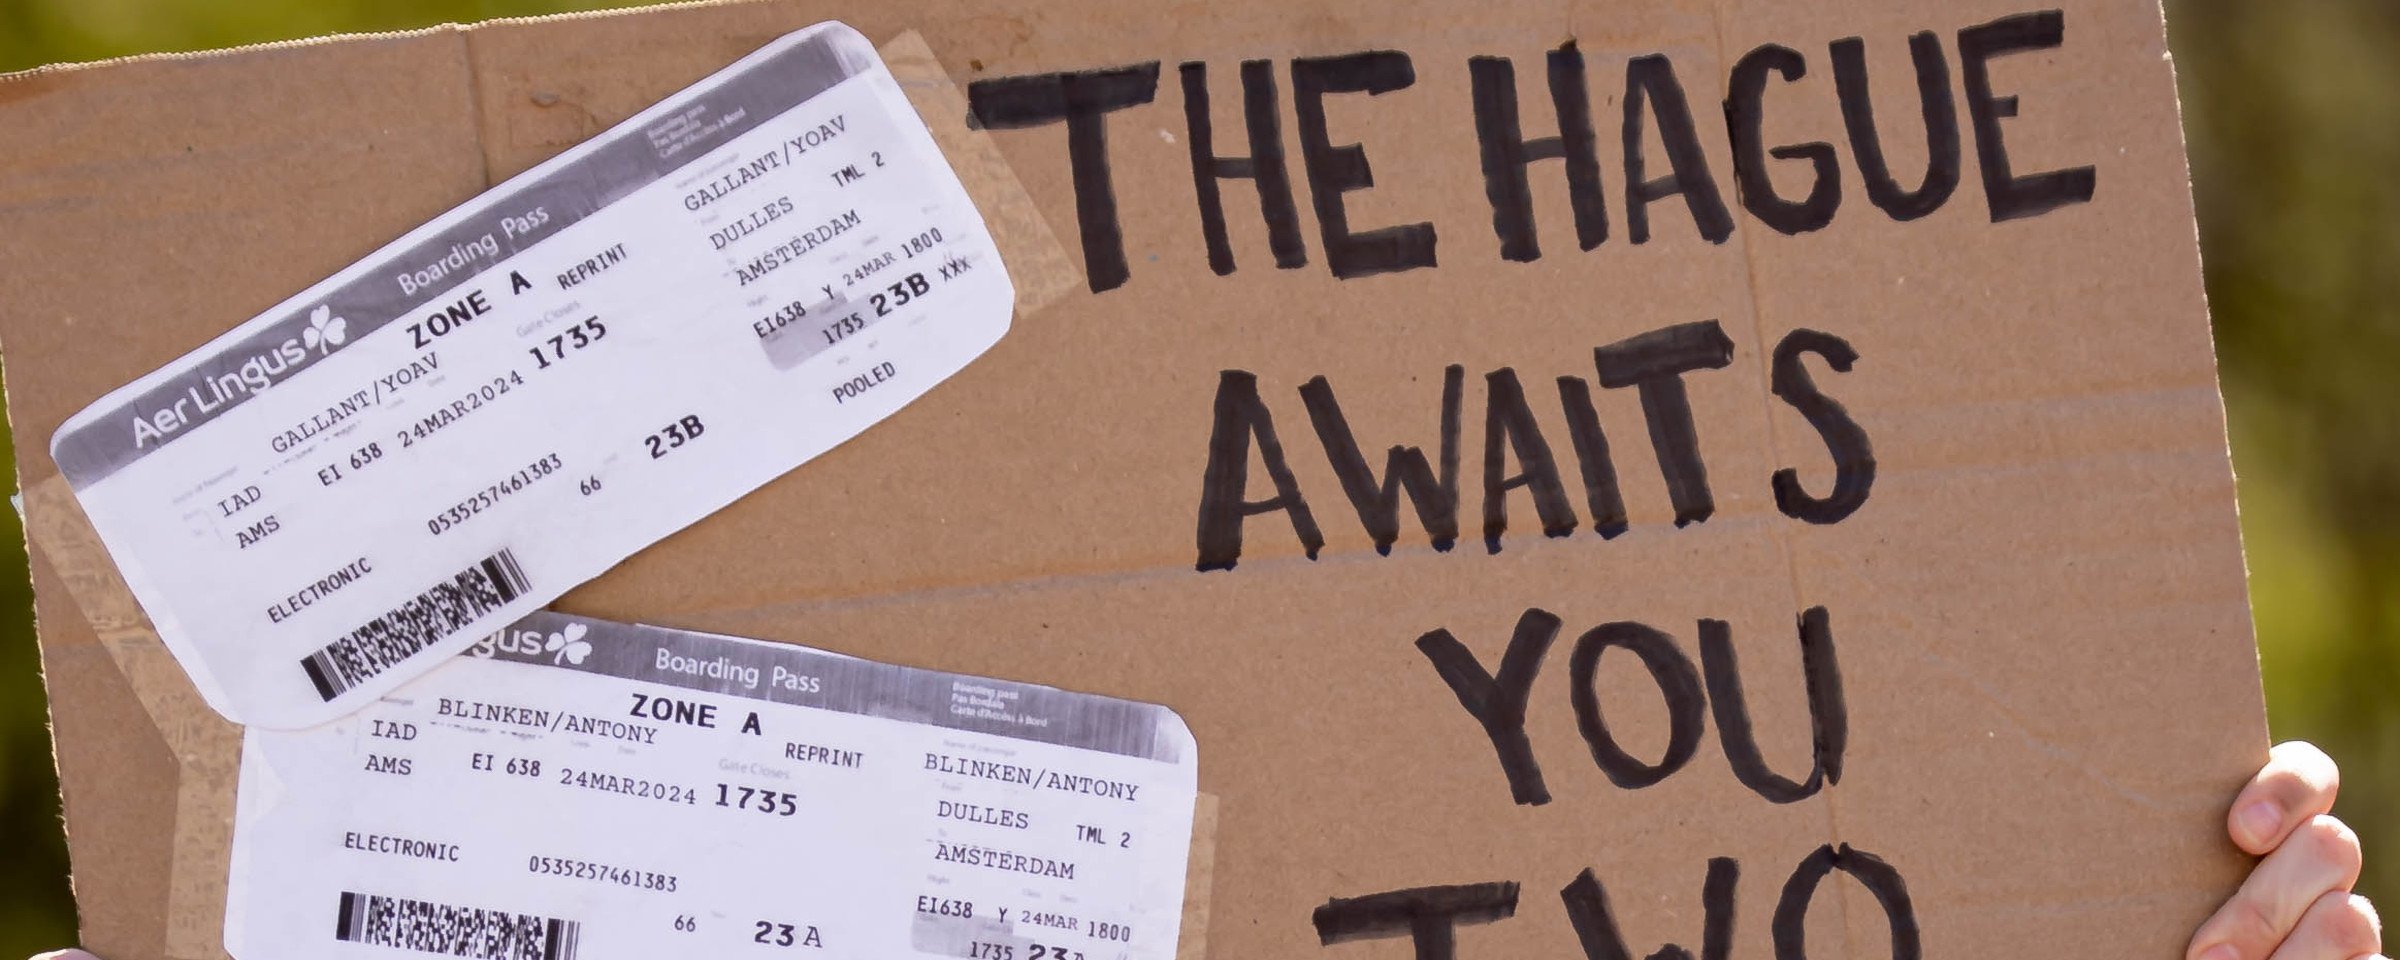 A cardboard protest sign reads "The Hague Awaits You Two" with mock plane tickets for Yoav Gallant and Antony Blinken